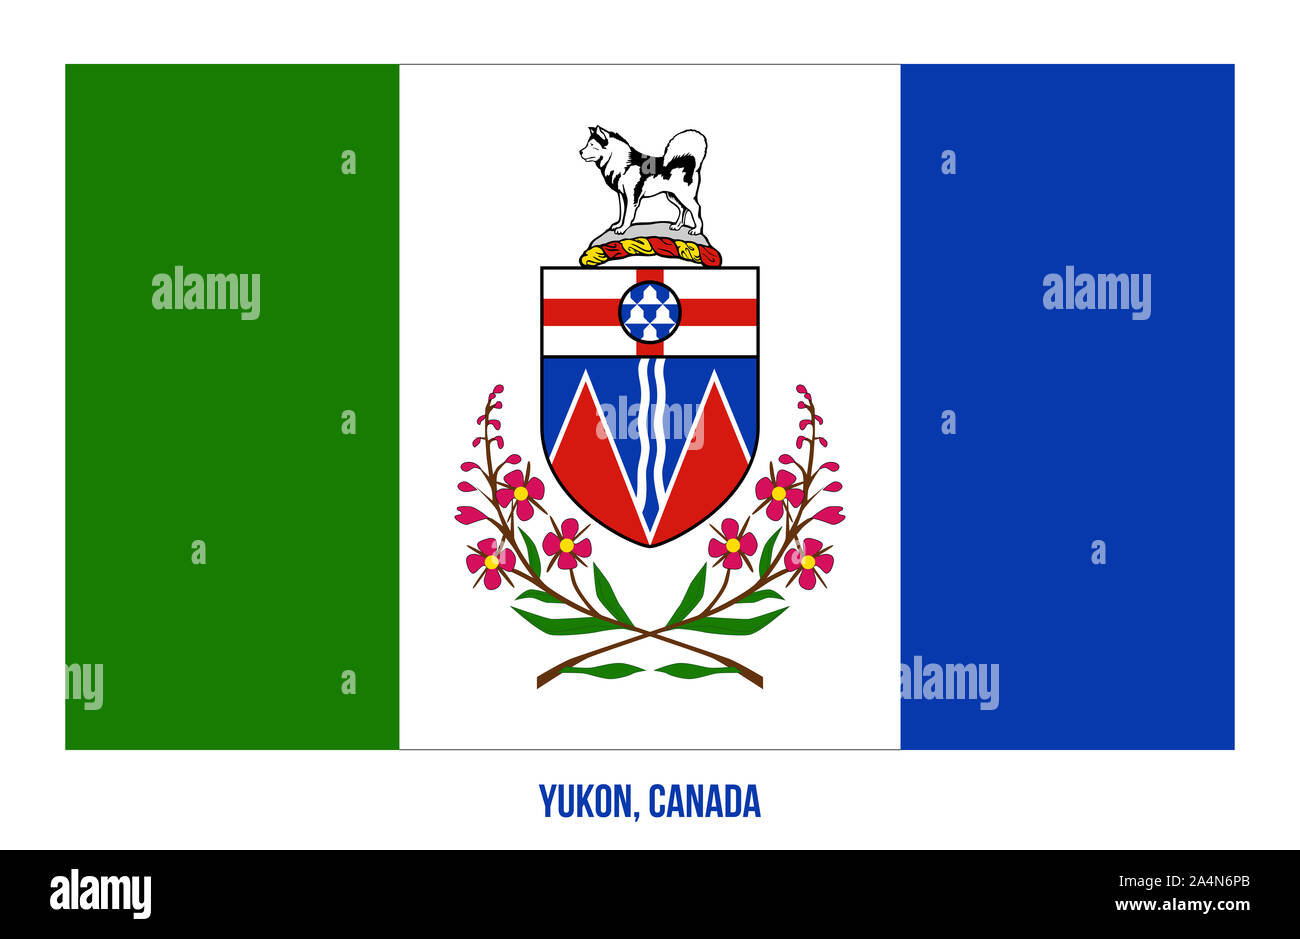 Yukon Flag Vector Illustration on White Background. Territory Flag of Canada. Correct Size, Proportion and Colors. Stock Photo